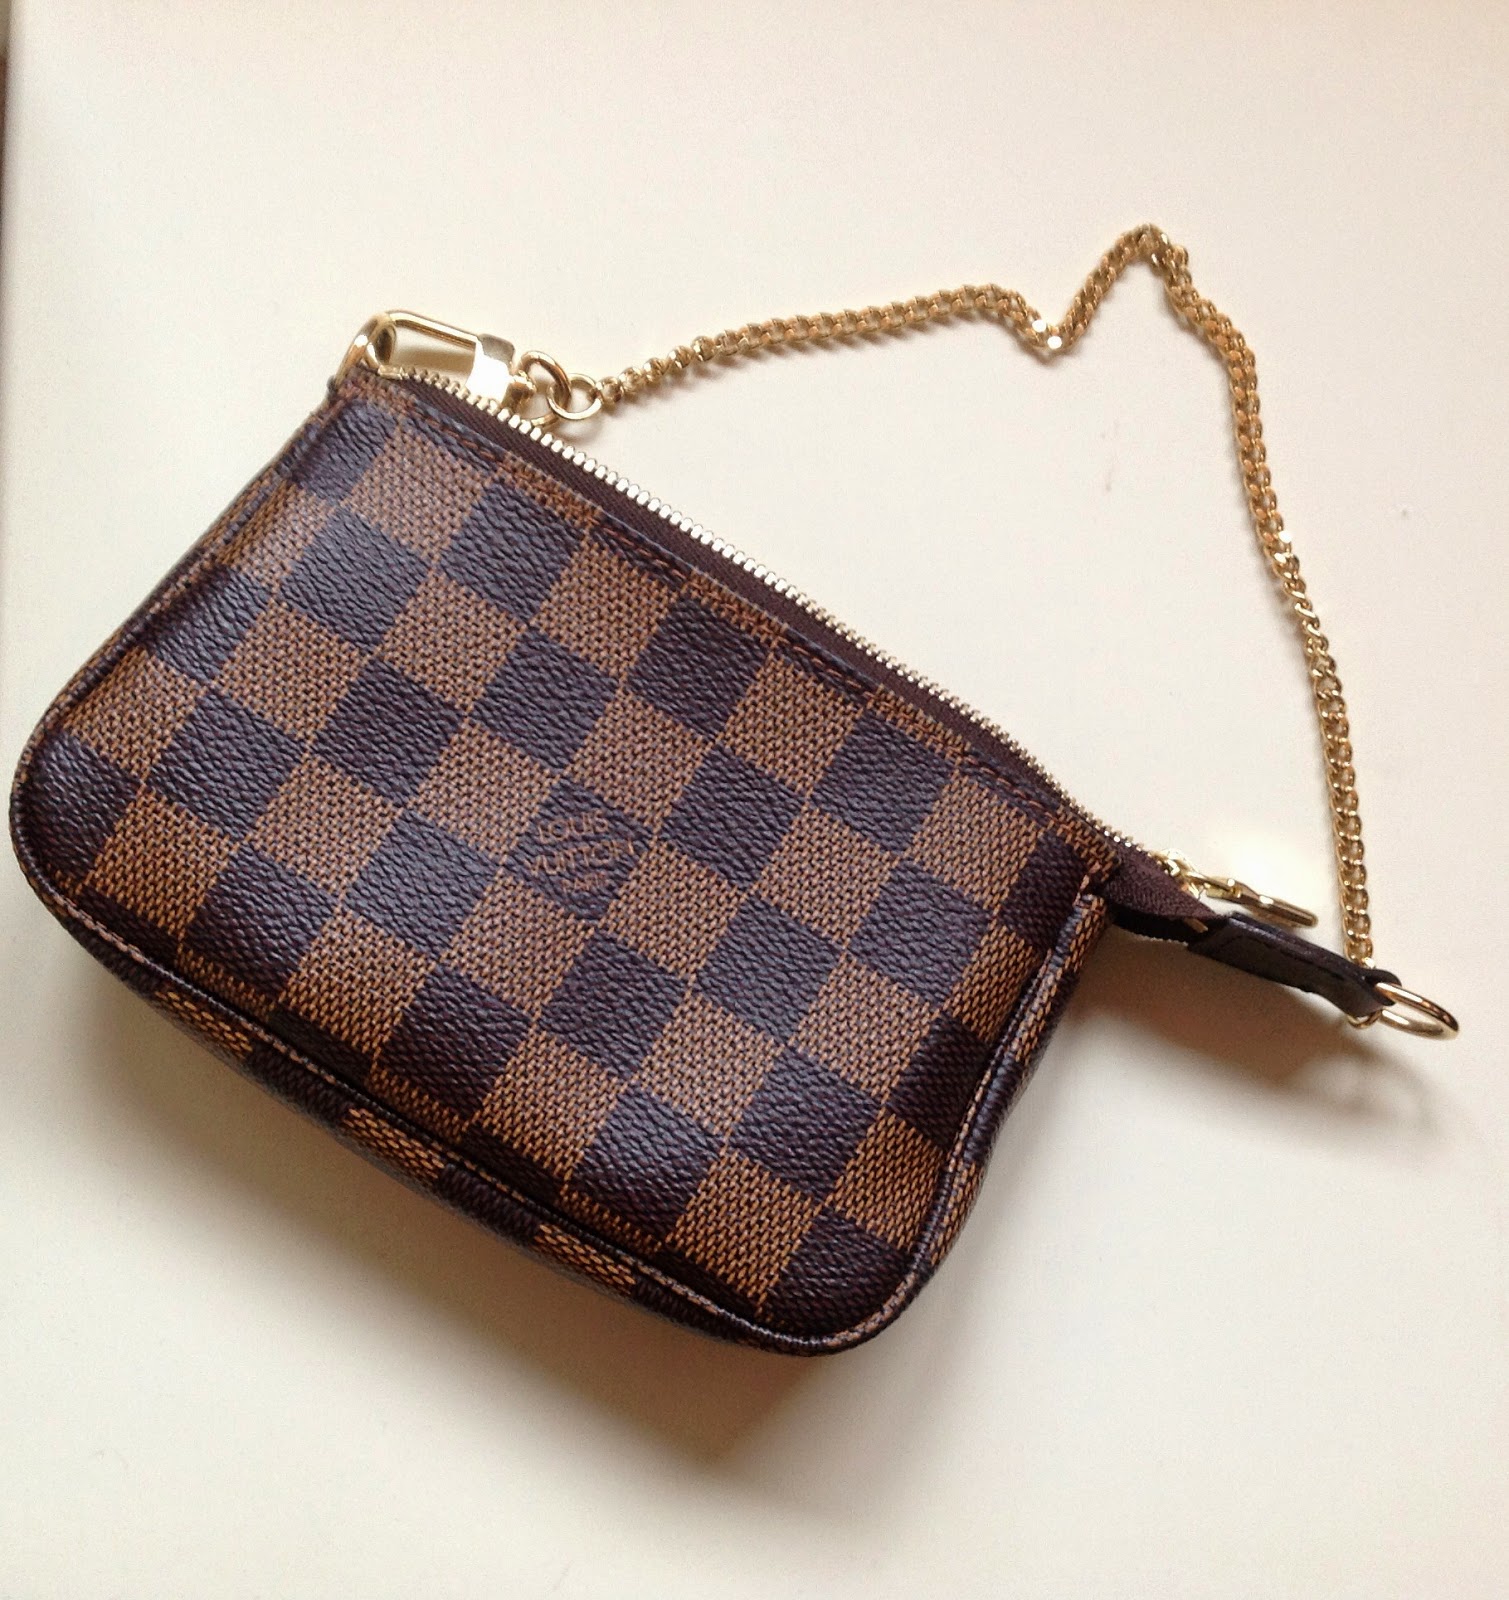 Size Of Lv Mini Pochette | Confederated Tribes of the Umatilla Indian Reservation